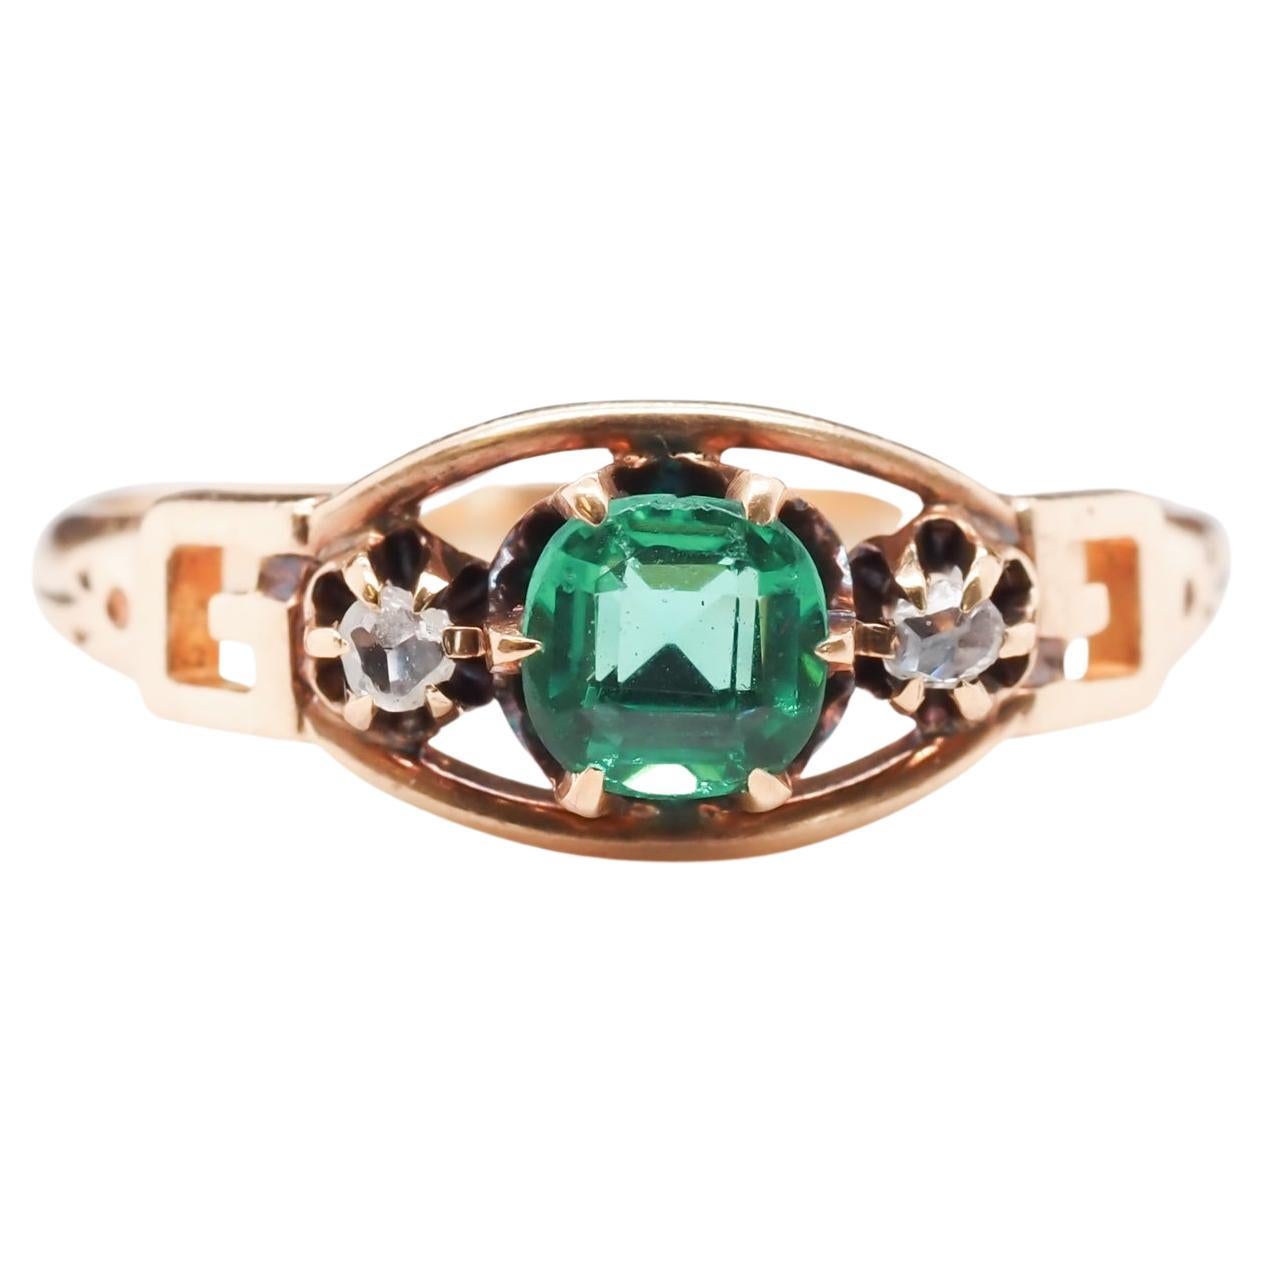 Circa 1900s Edwardian Emerald and Rose Cut Diamond Engagement Ring For Sale